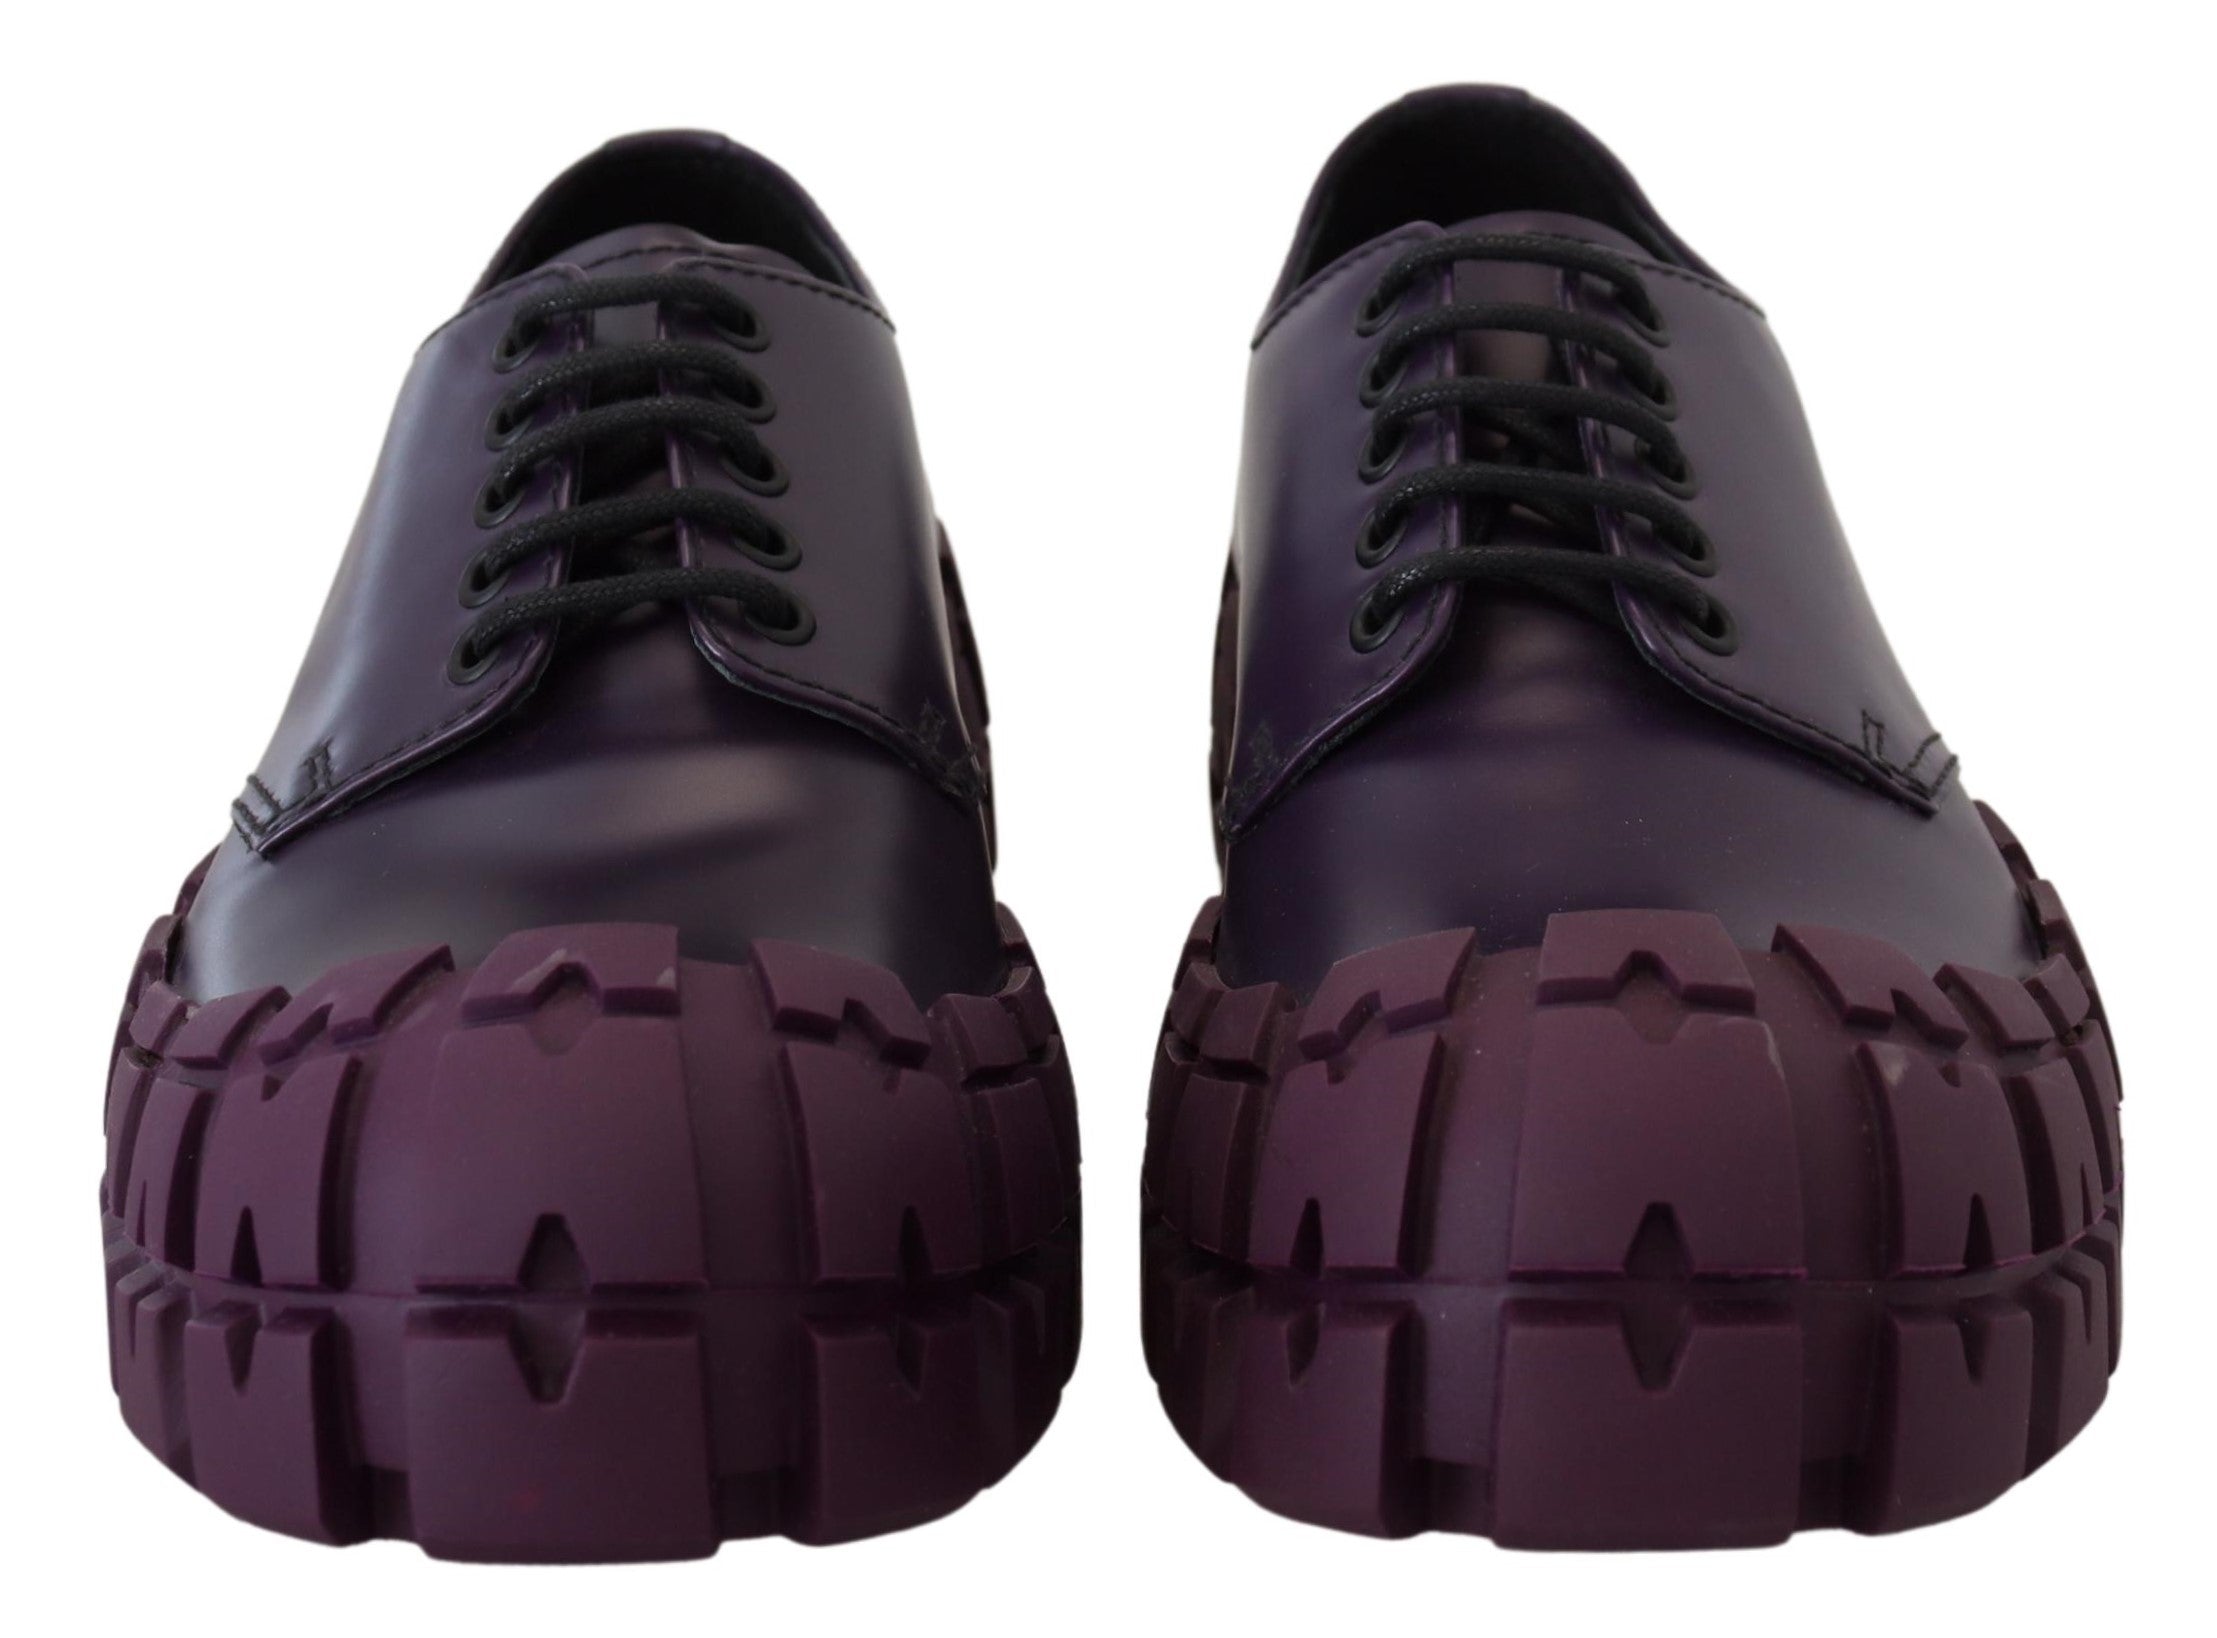 Prada Purple Leather Tractor Lace Up Sneakers Shoes